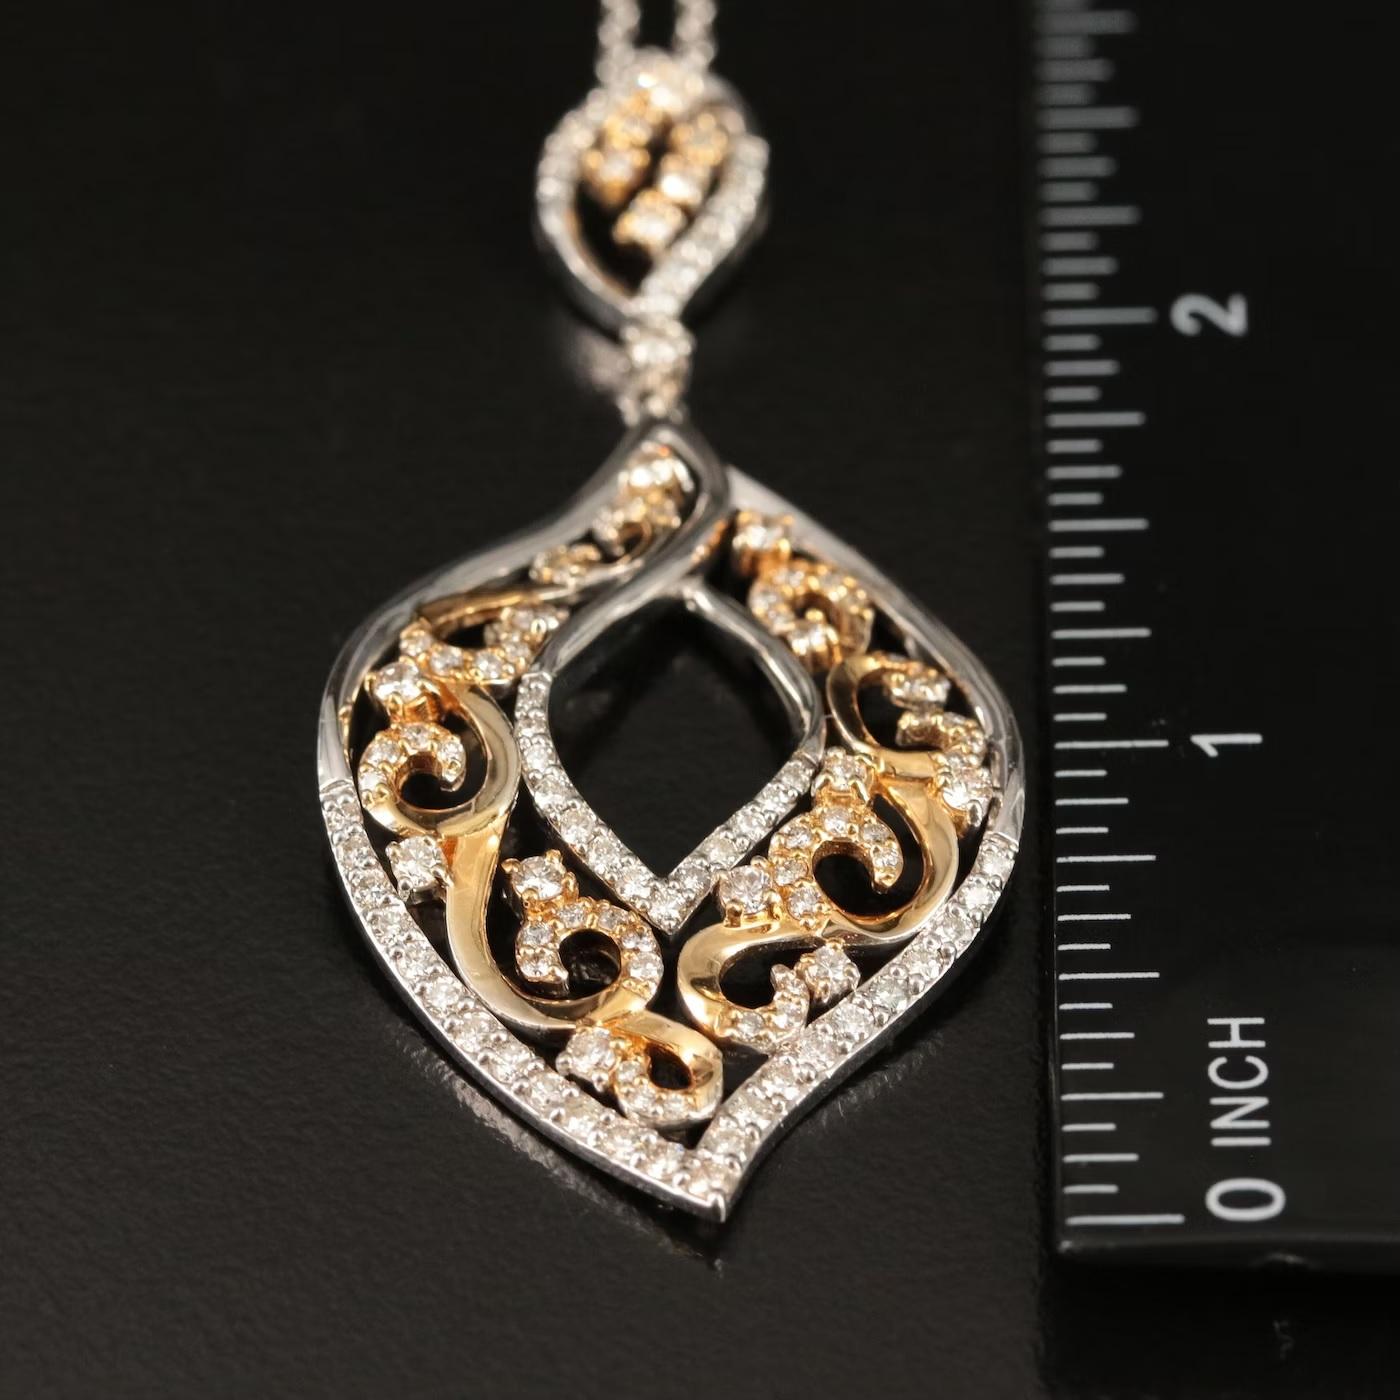 Designer EFFY necklace, fully hallmarked

NEW with tags, Tag price $8500

Leaf design, amazing and supersized statement piece, about 2.5 inch in drop length

14K White and Yellow gold pendant, stamped 14K

1.79 CT Diamond, Great quality & super